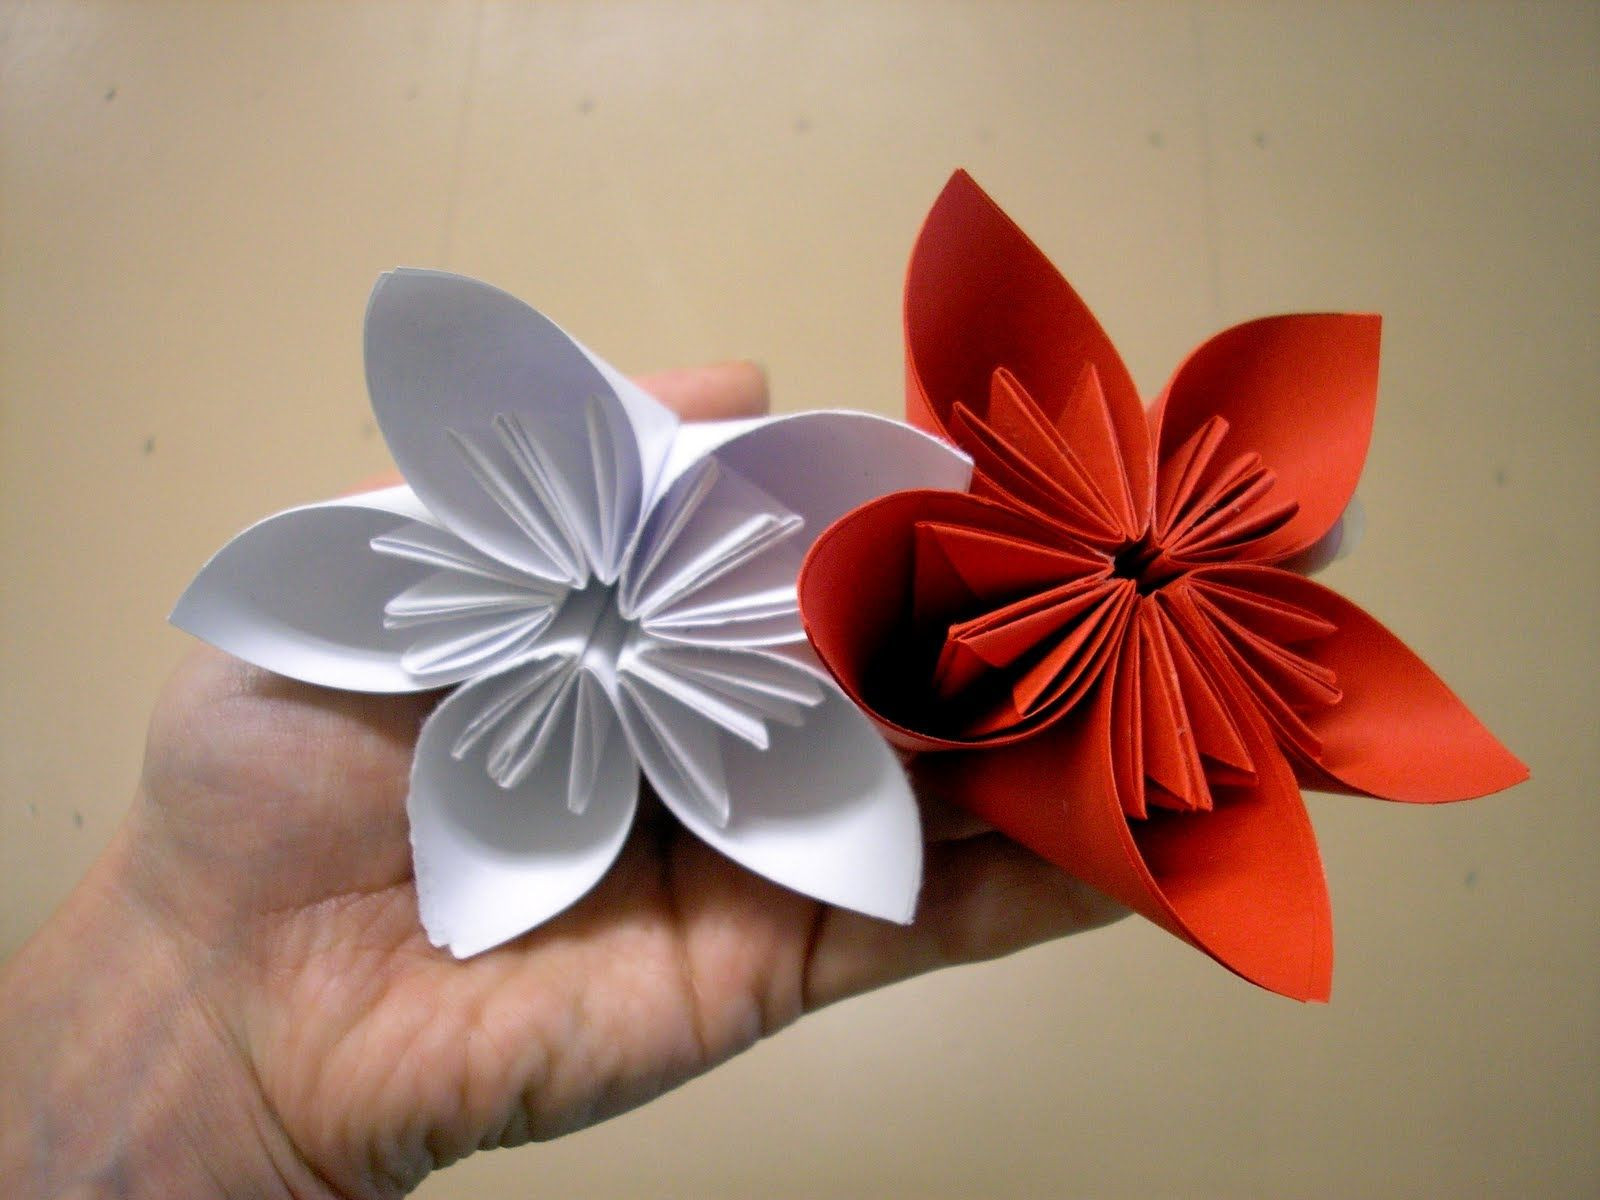 Origami Easy Flower Origami Simple Fleur Awesome Origami Flowers For Beginners How To